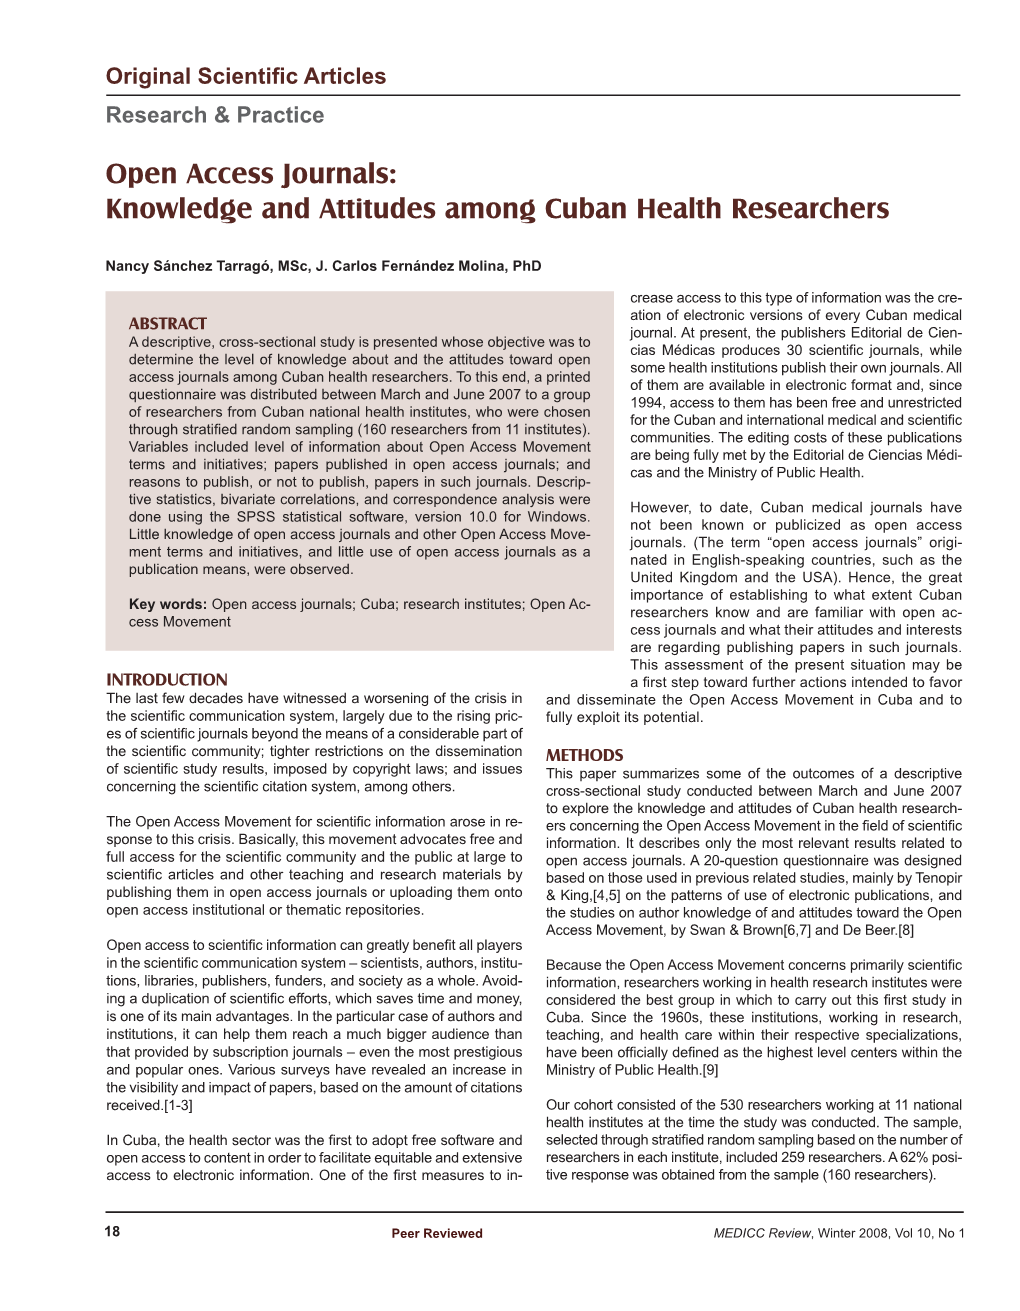 Open Access Journals: Knowledge and Attitudes Among Cuban Health Researchers